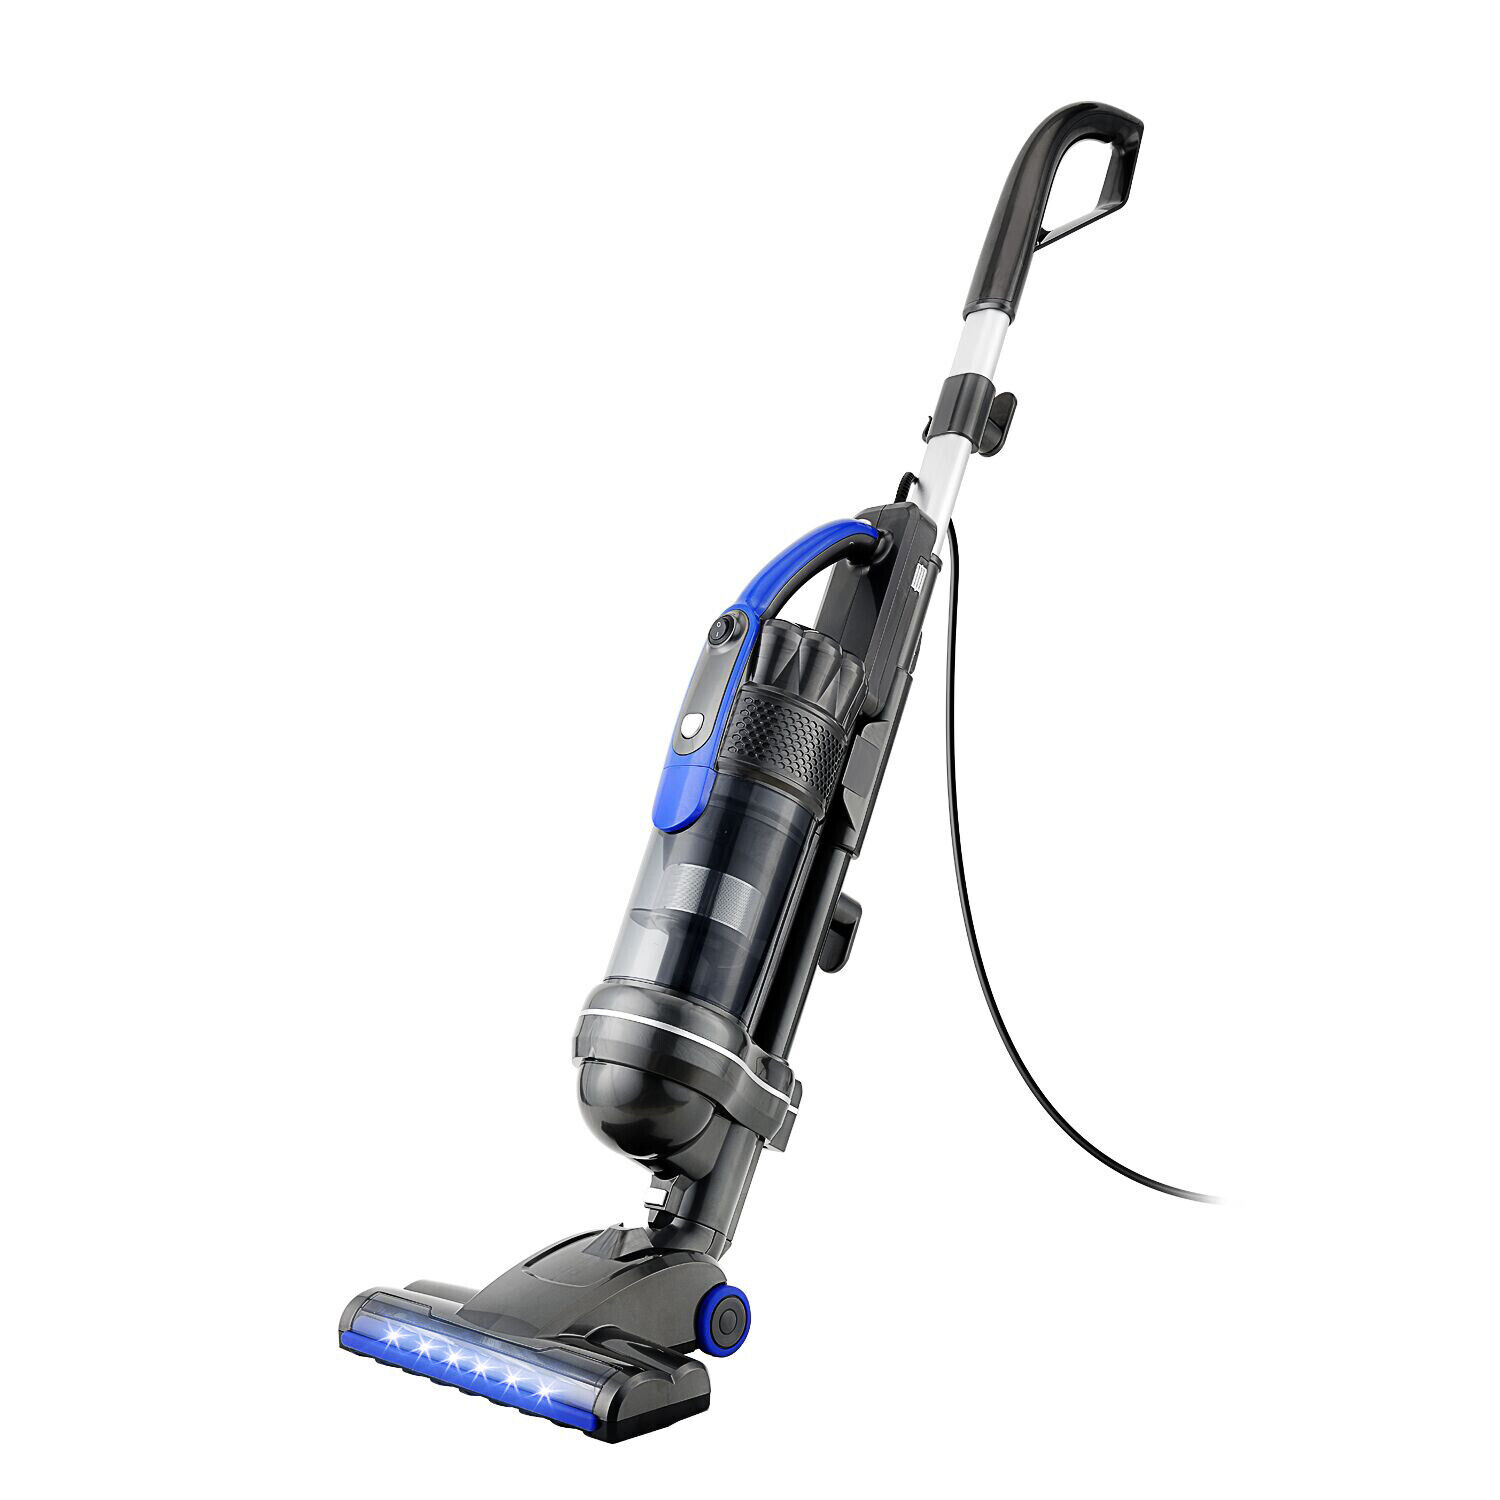 New 1200W Turbo 2in1 Upright Bagless Vacuum Cleaner With Spinning